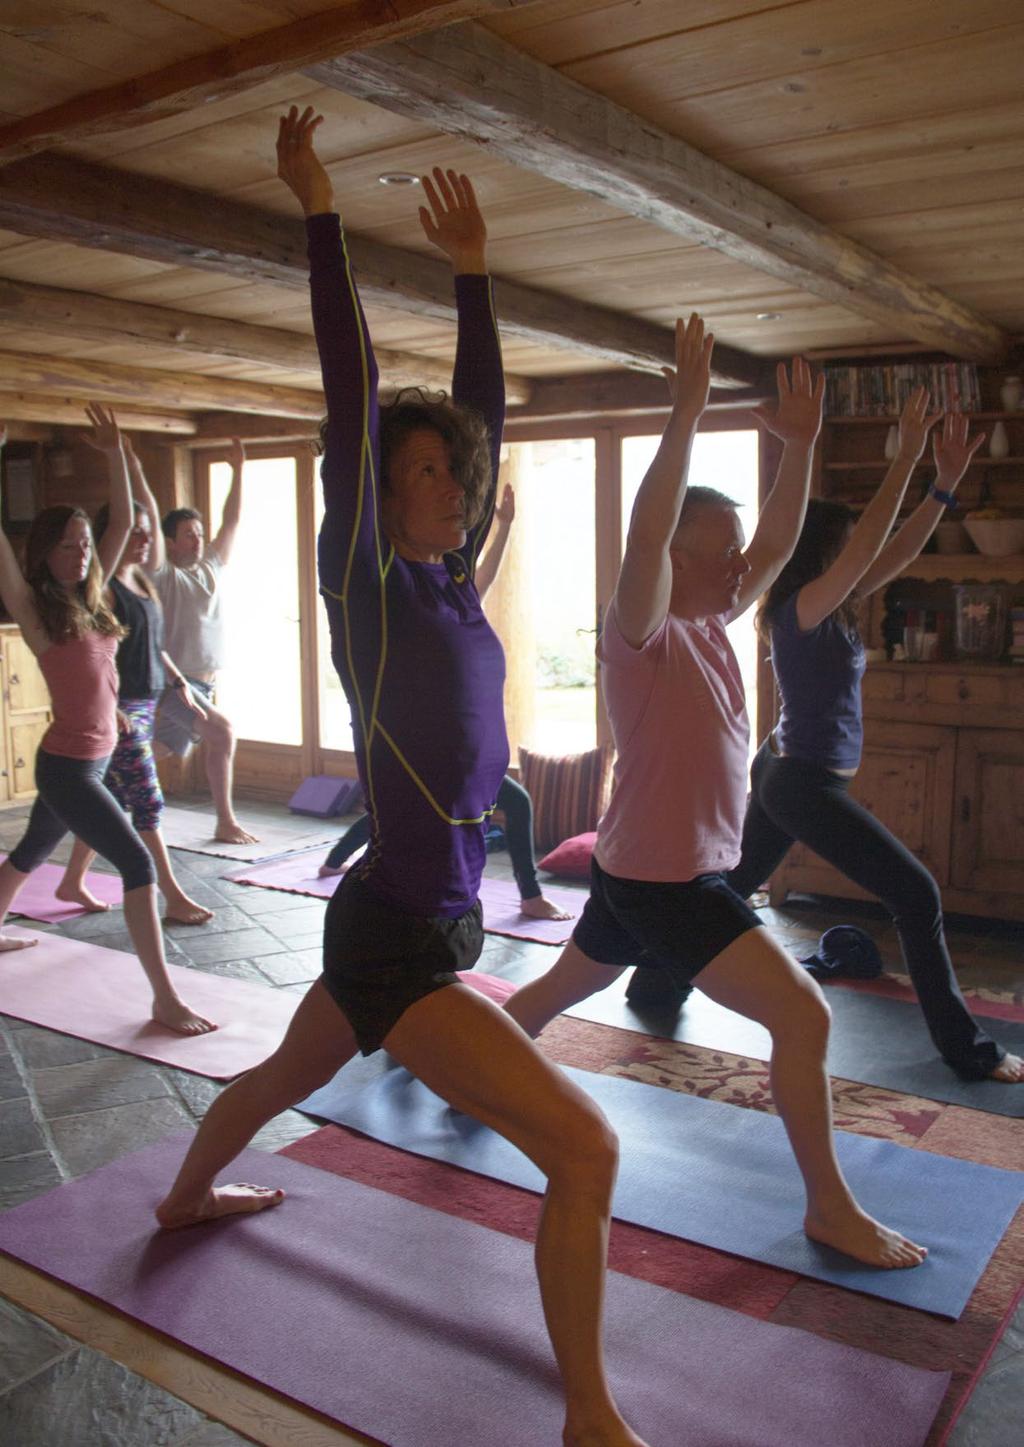 Soulshine "Combining skiing and Yoga has been awesome! I m returning with a healthy body & mind. Thank you Soulshine!